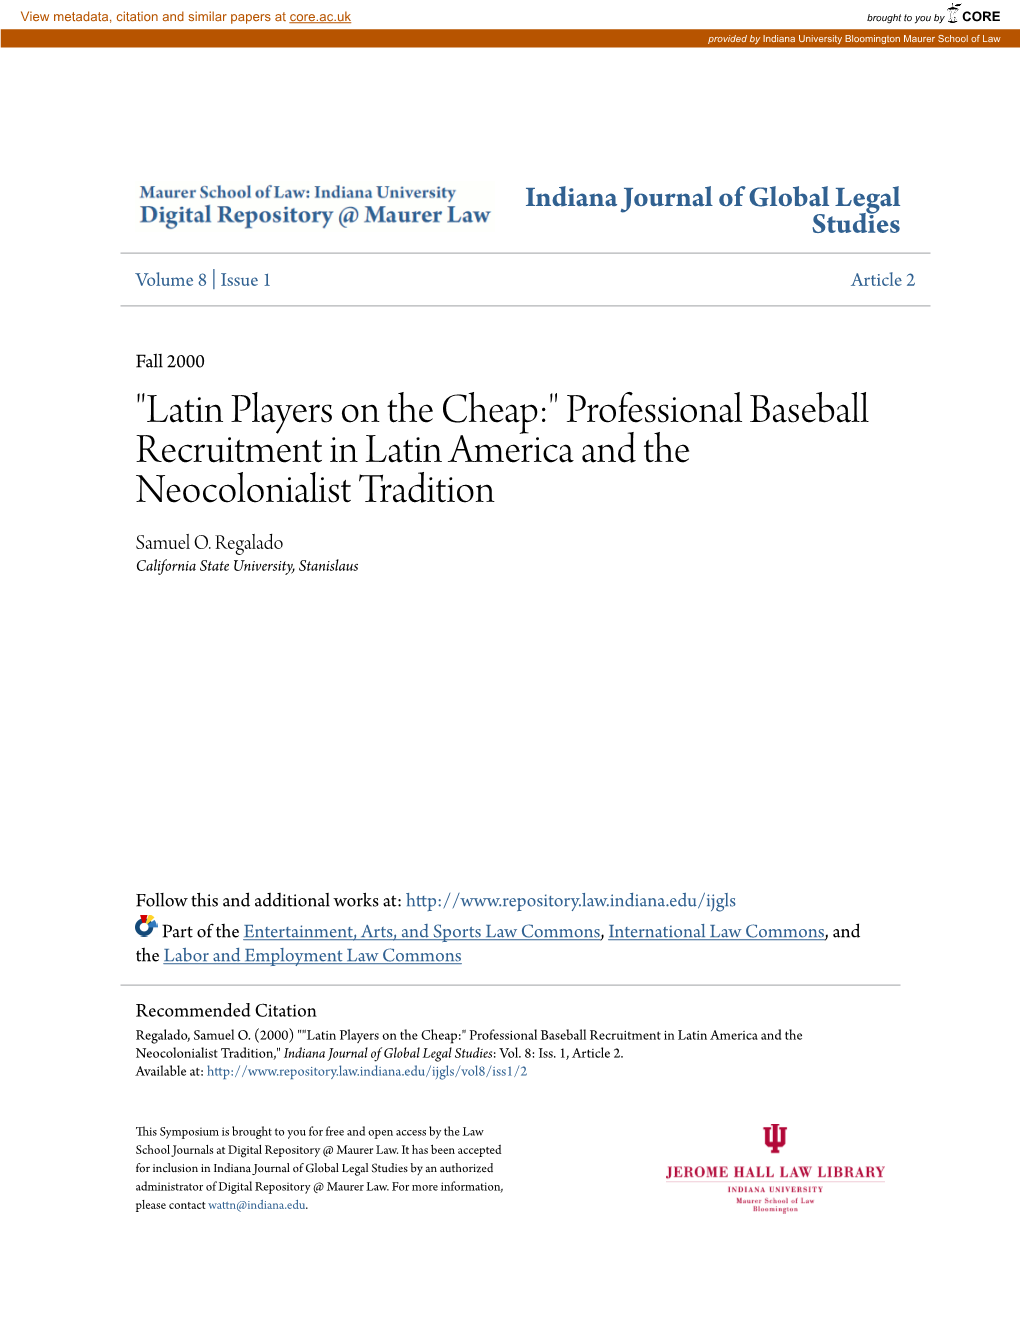 "Latin Players on the Cheap:" Professional Baseball Recruitment in Latin America and the Neocolonialist Tradition Samuel O